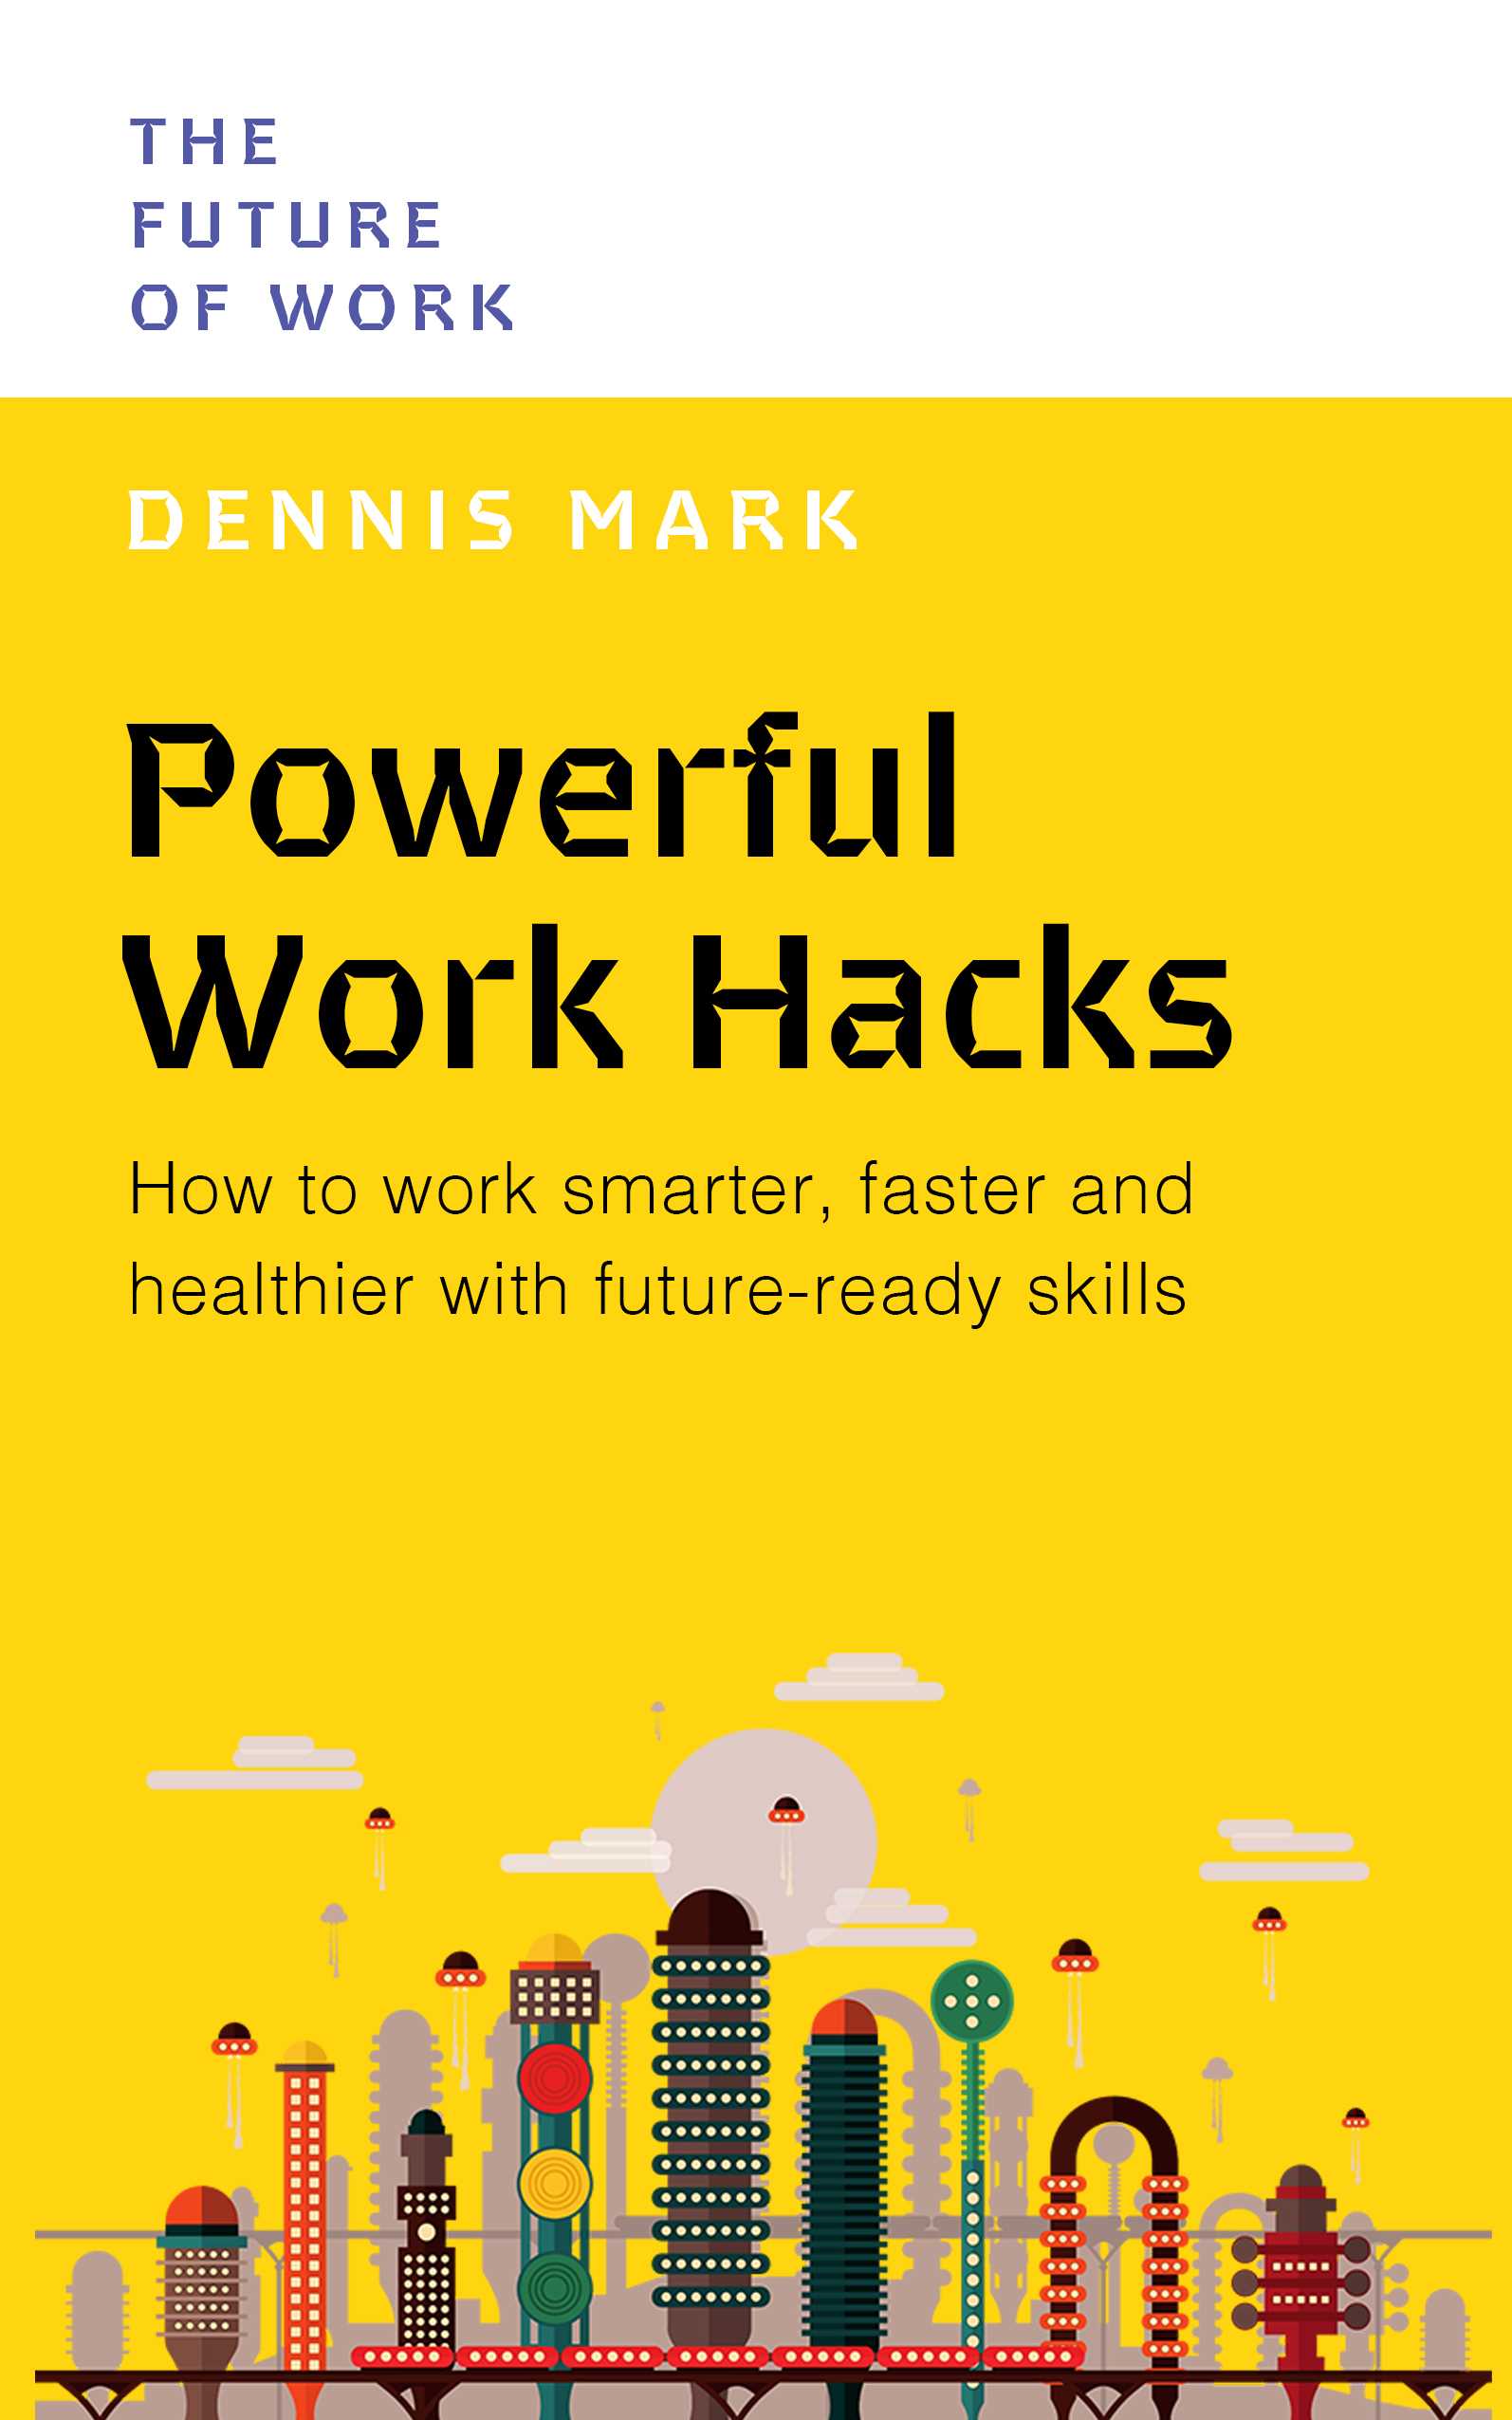 Powerful Work Hacks: How to Work Smarter, Faster and Healthier With Future-ready Skills